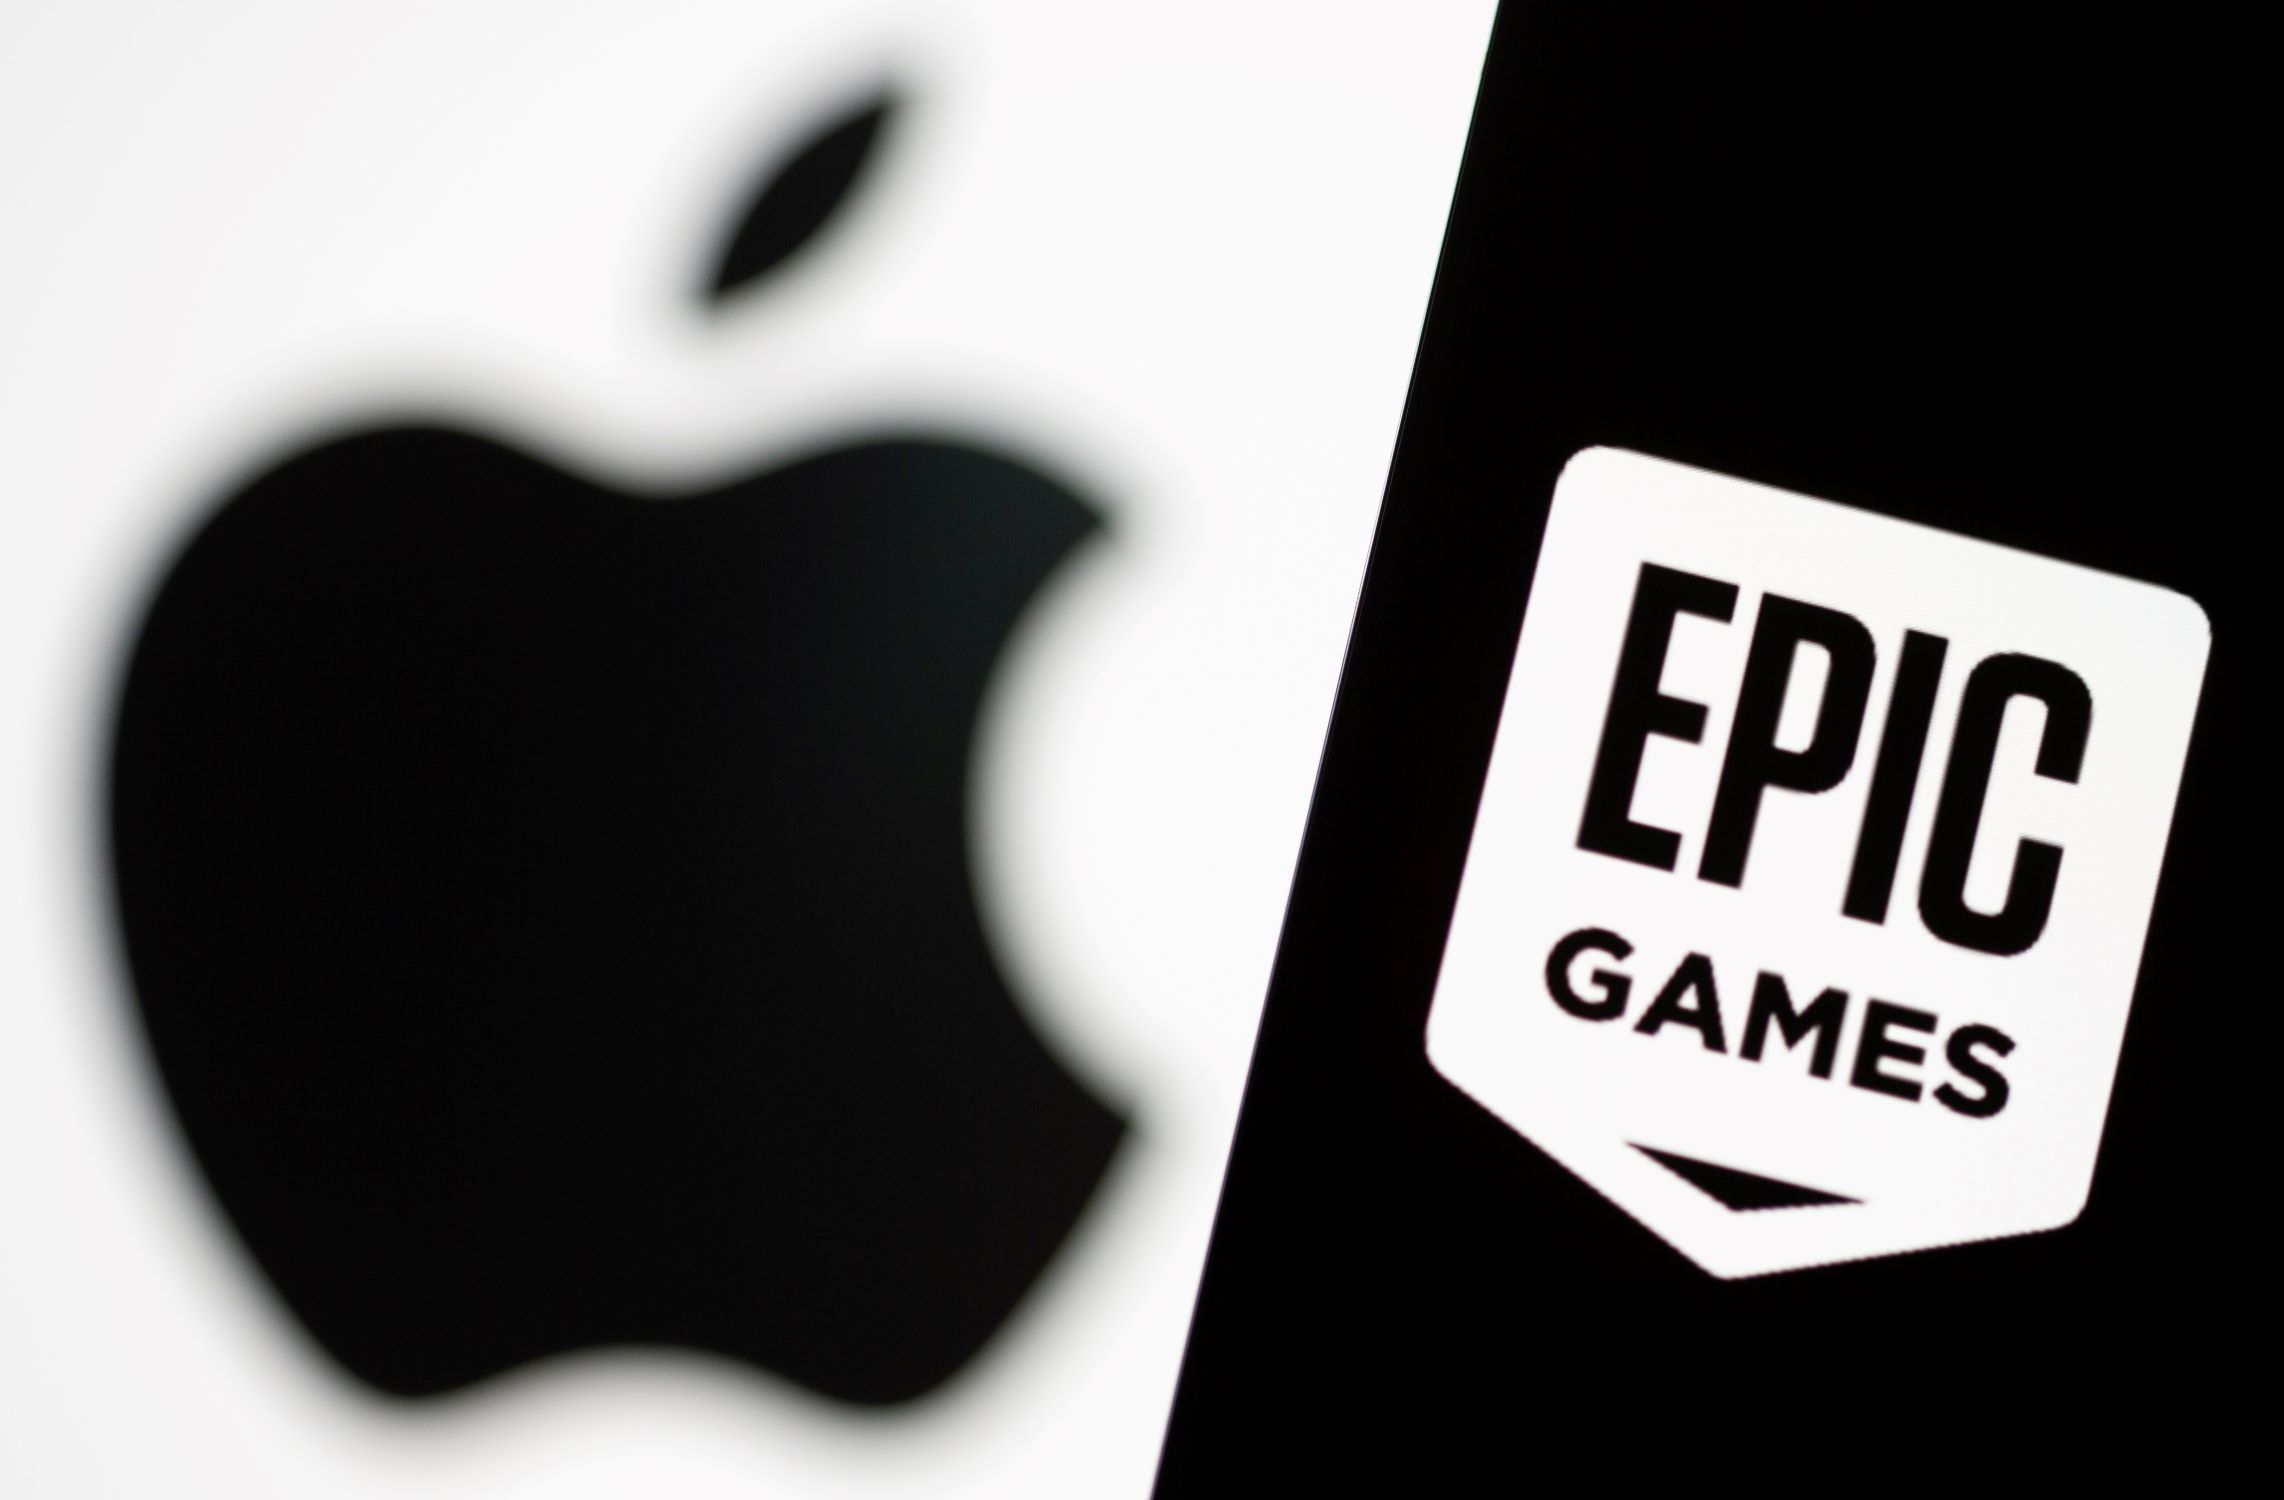 Apple Appeals To Supreme Court To Reconsider Ruling In Epic’s Favor